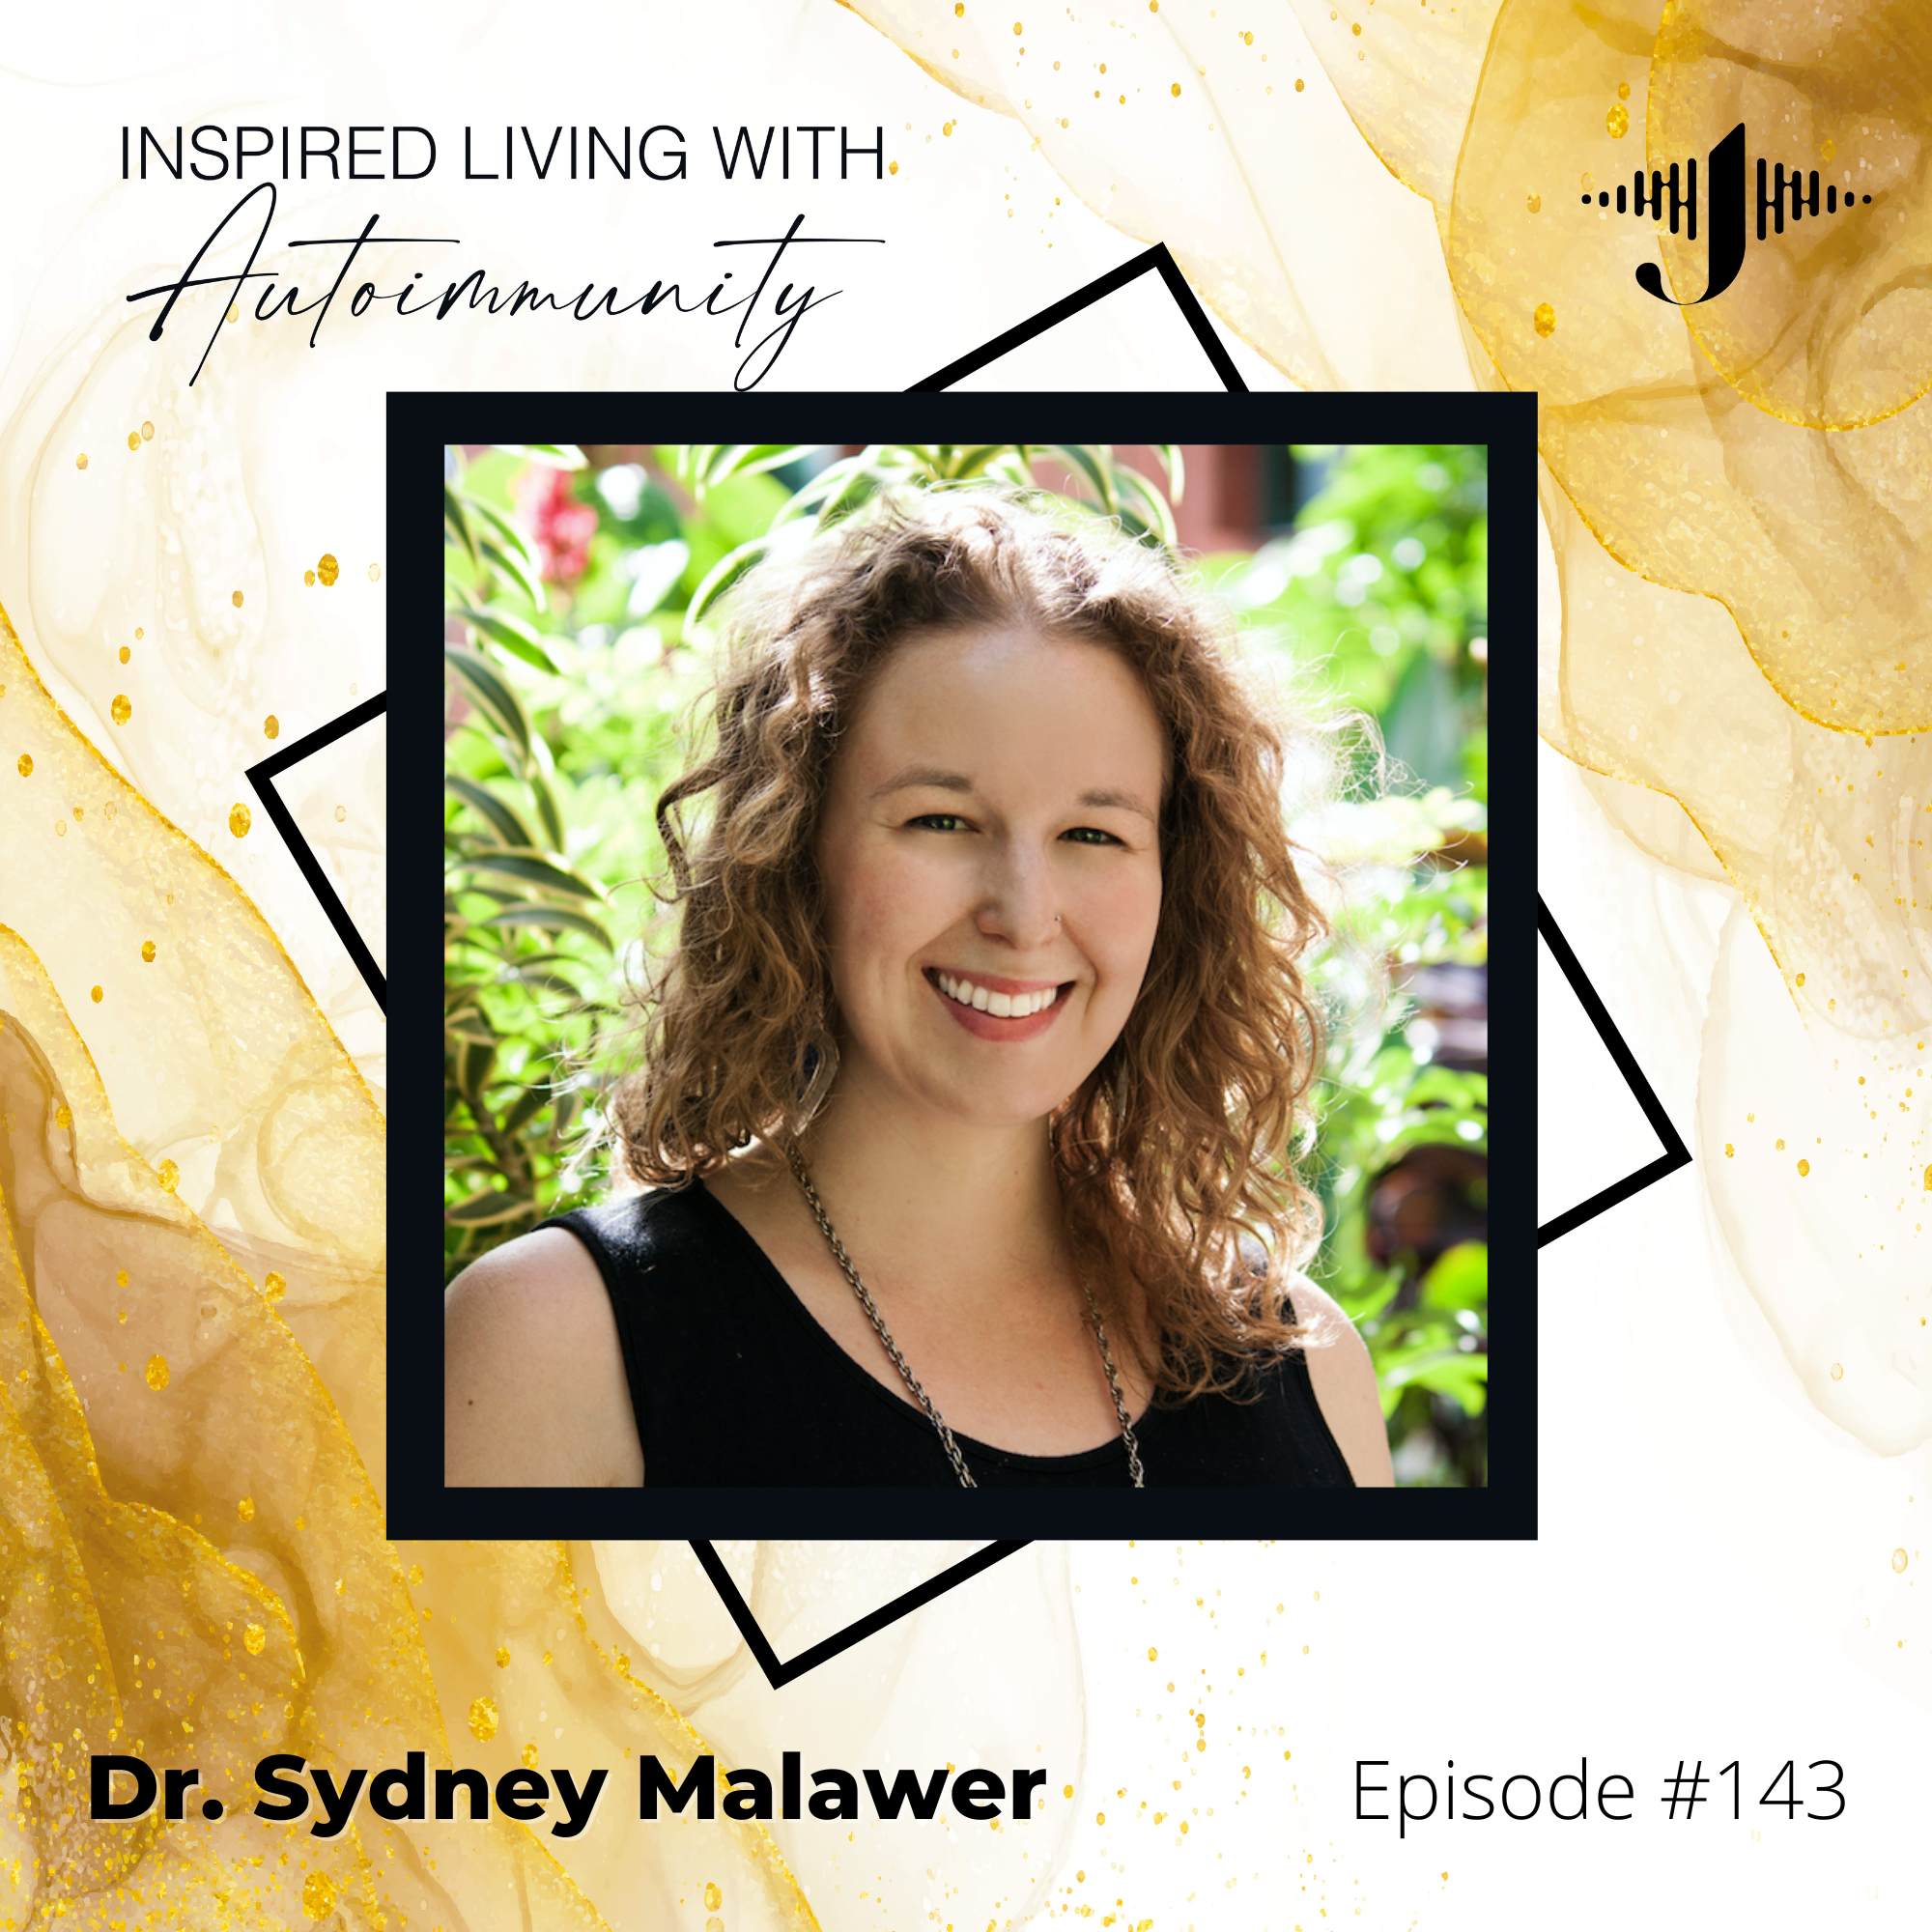 Sydney Malawer: Acupuncture and Chinese Medicine for Autoimmunity